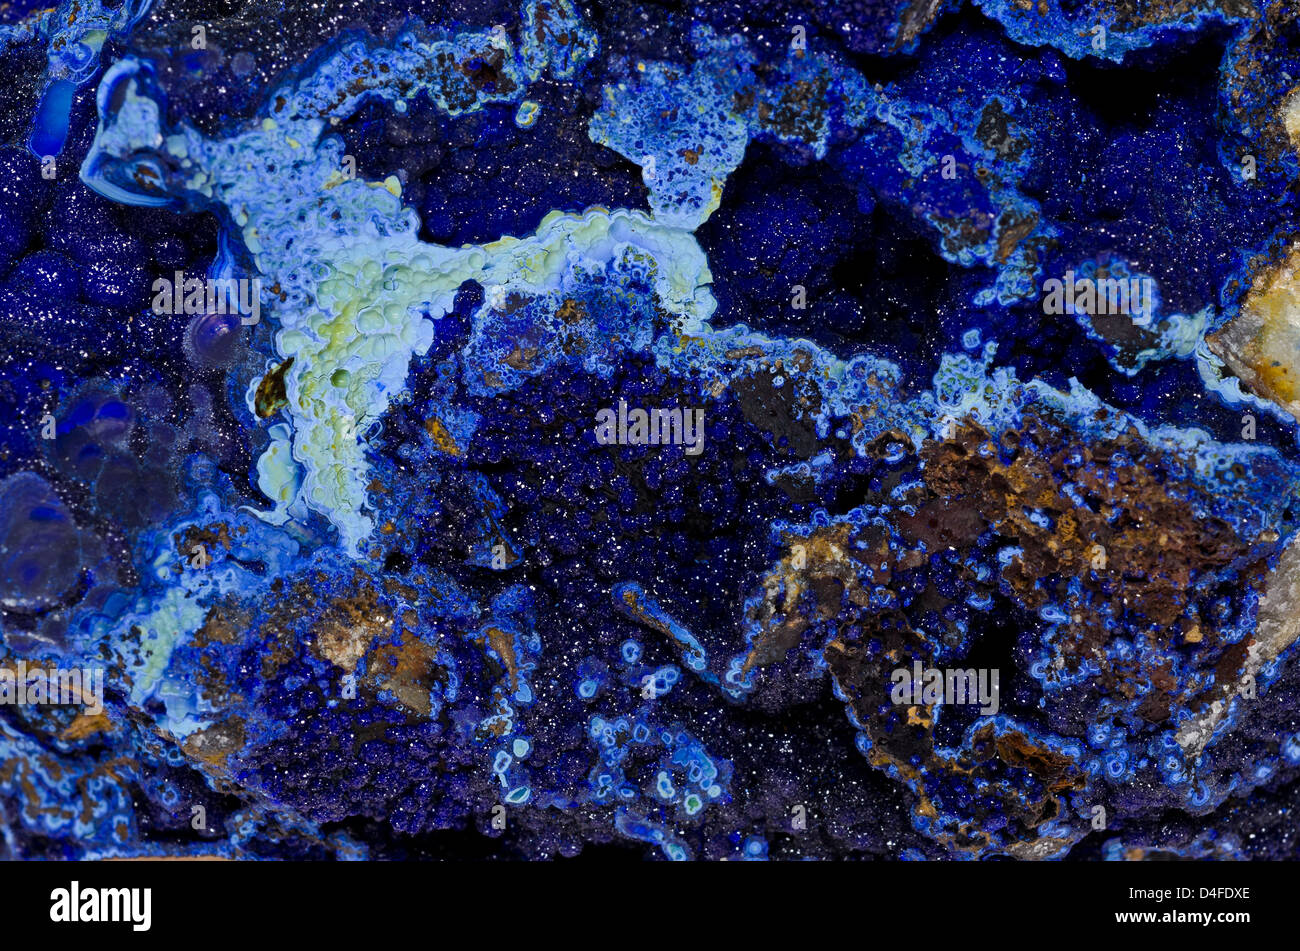 Geological specimen of Azurite mineral crystals Stock Photo